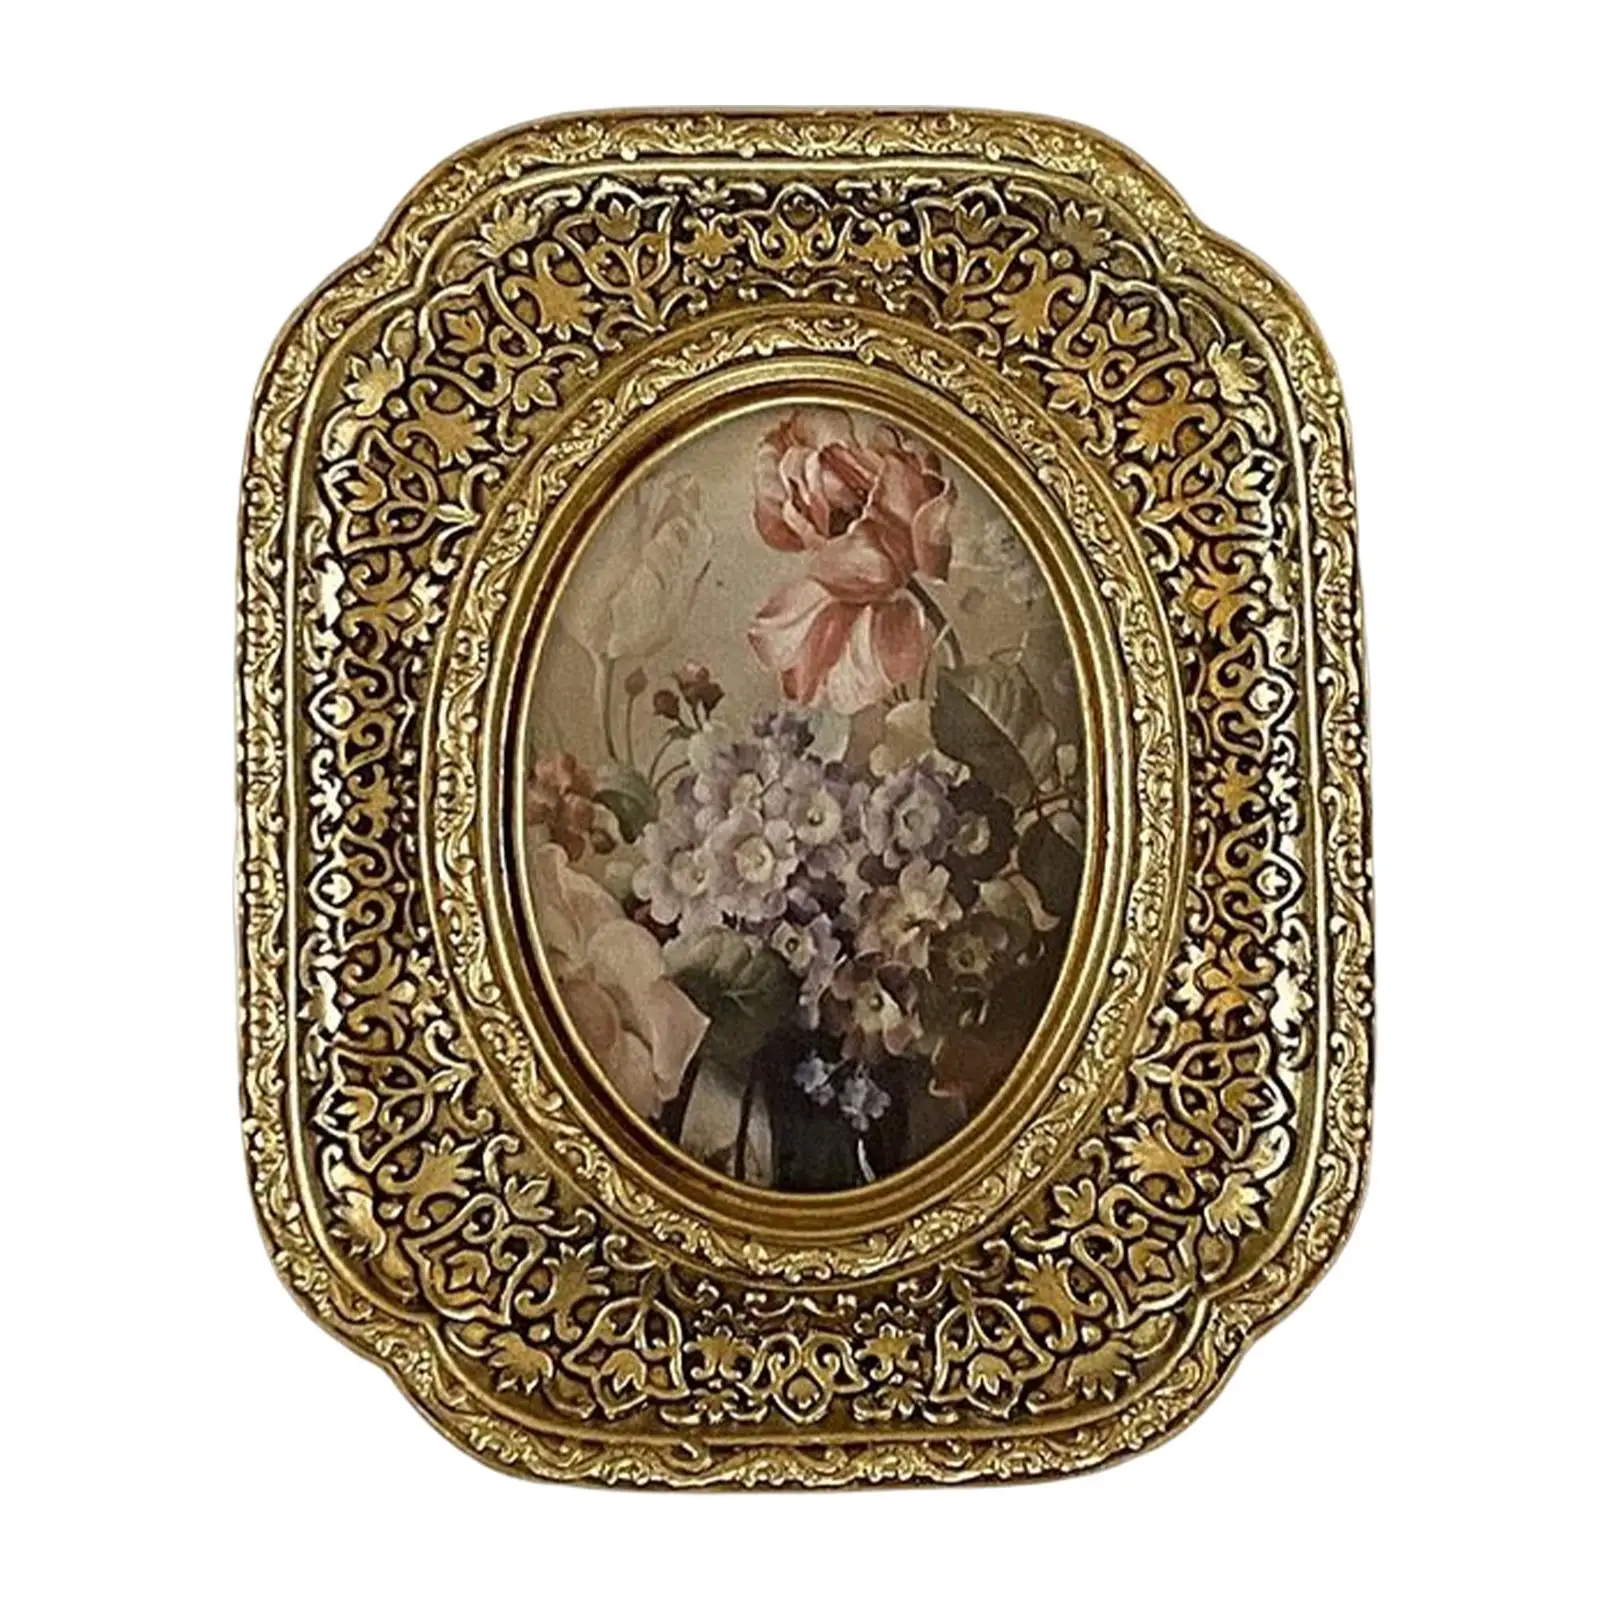 Retro Style Photo Frame Ornate Picture Frame for Holiday Home Decoration